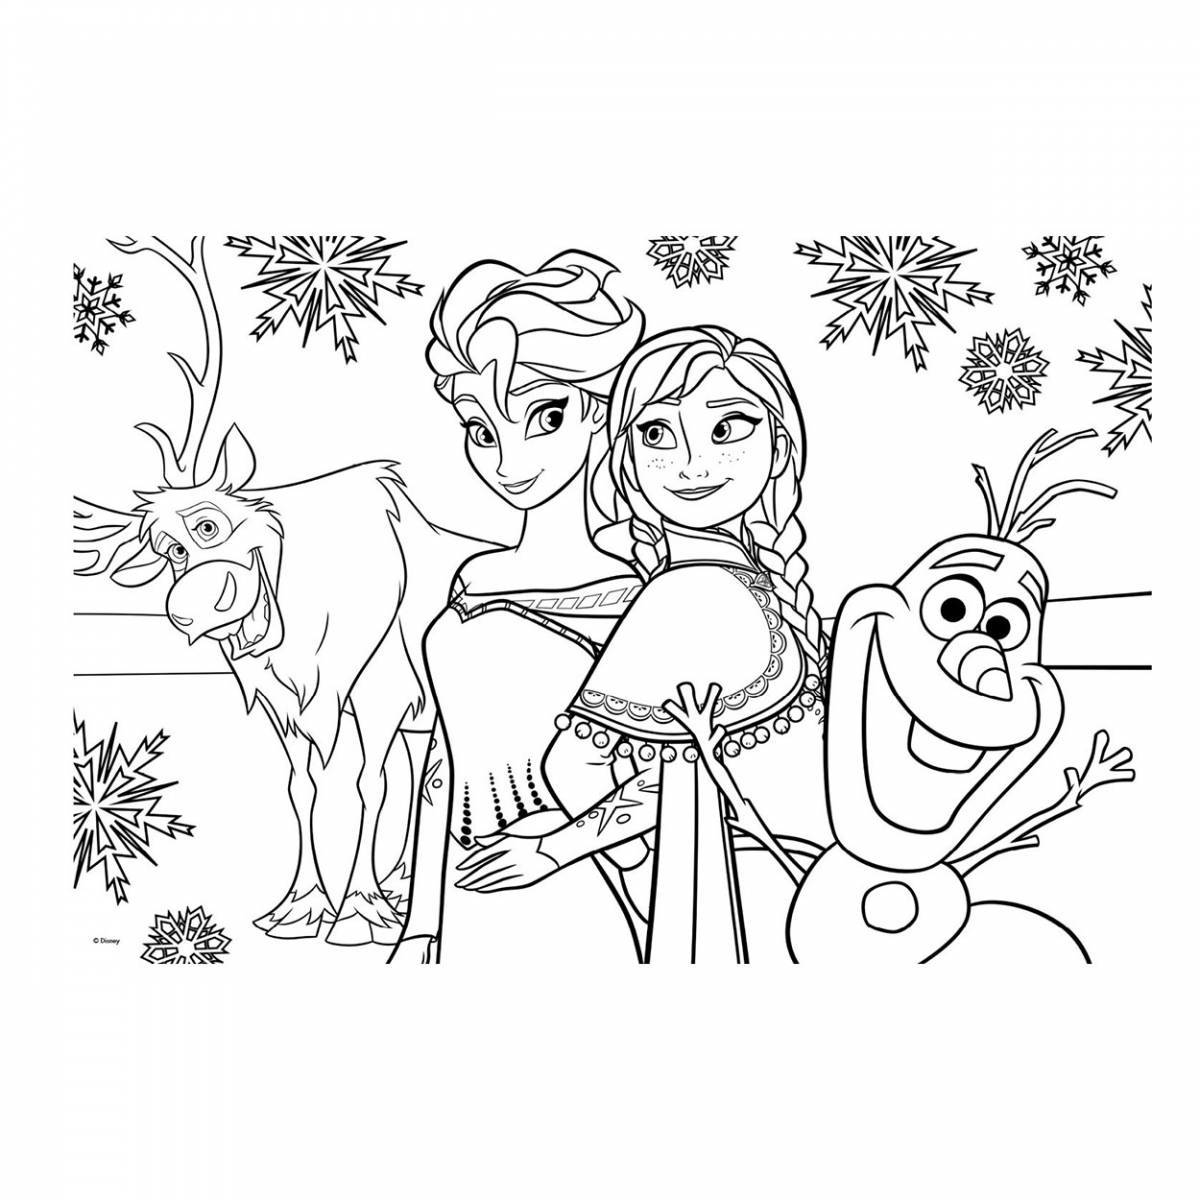 Awesome Frozen coloring book for kids